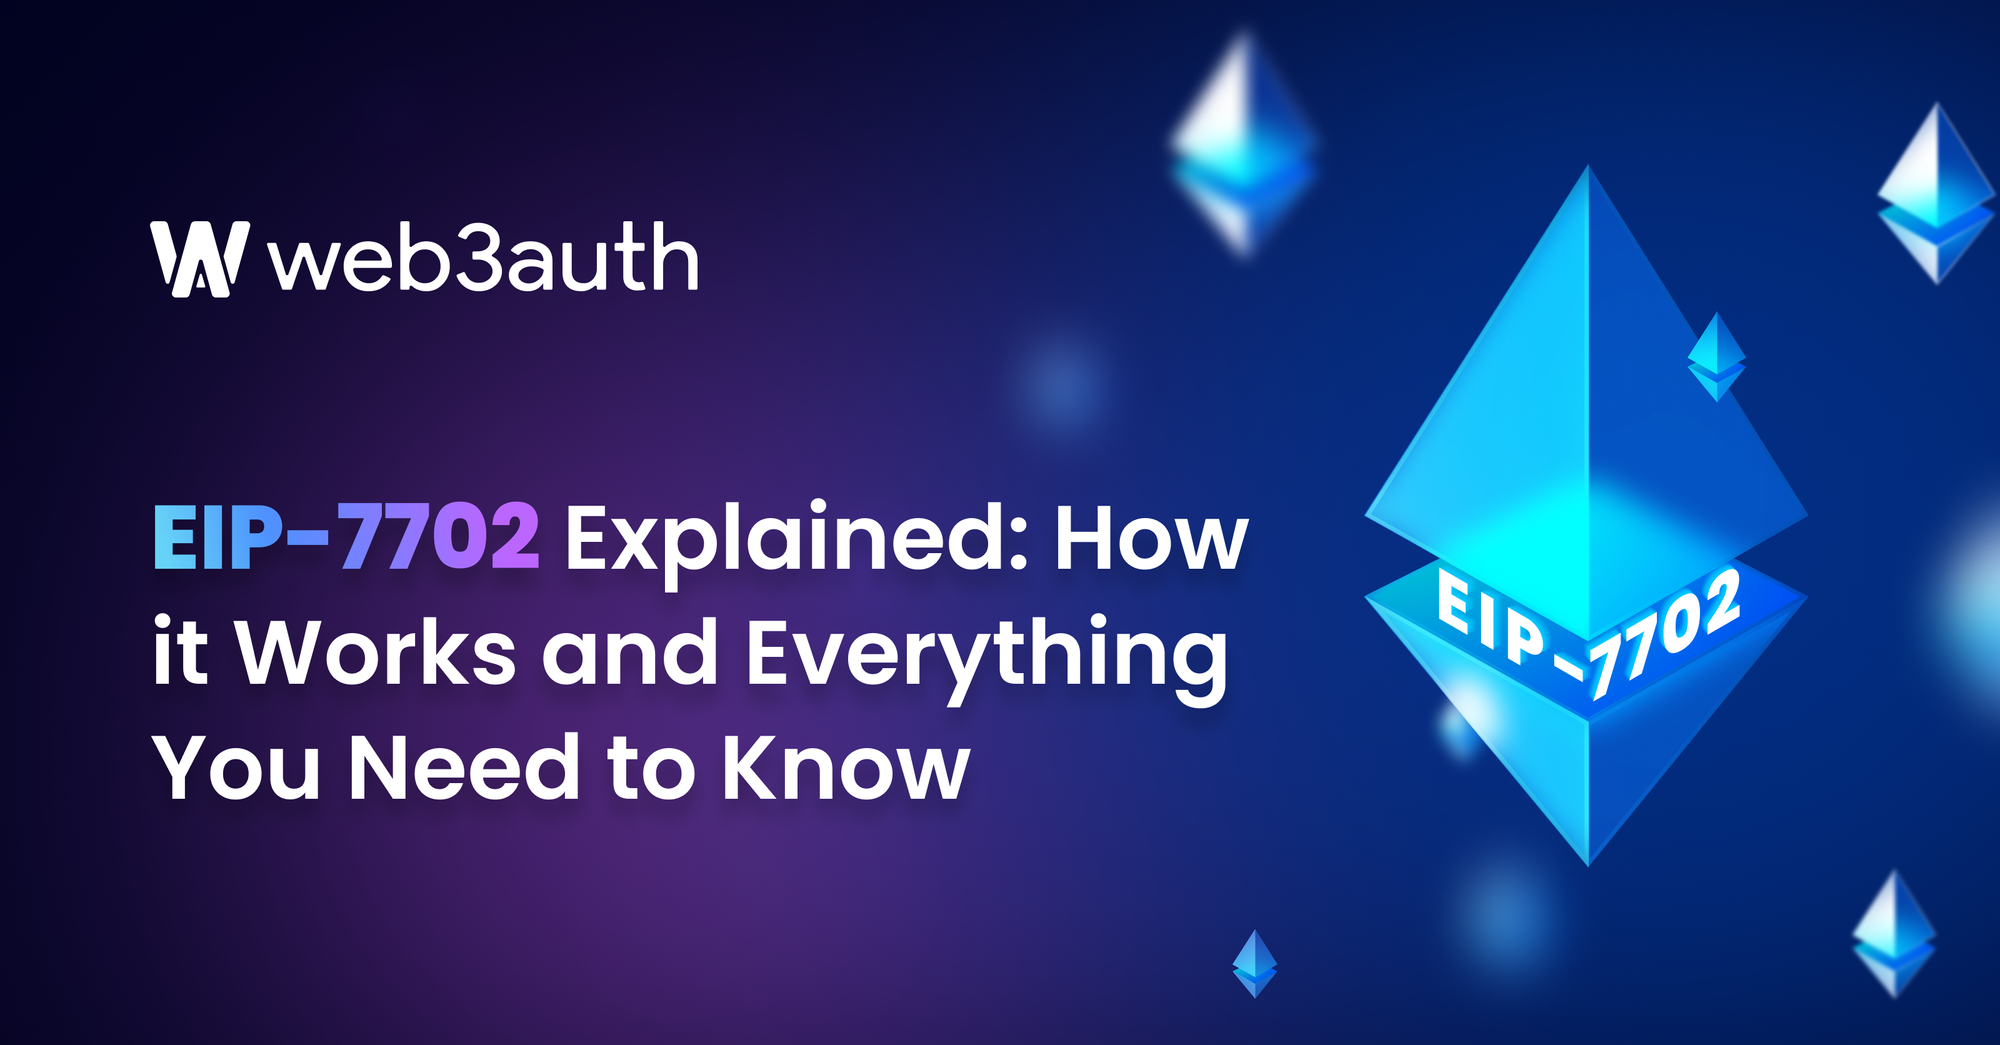 EIP-7702 Explained: How it Works and Everything You Need to Know